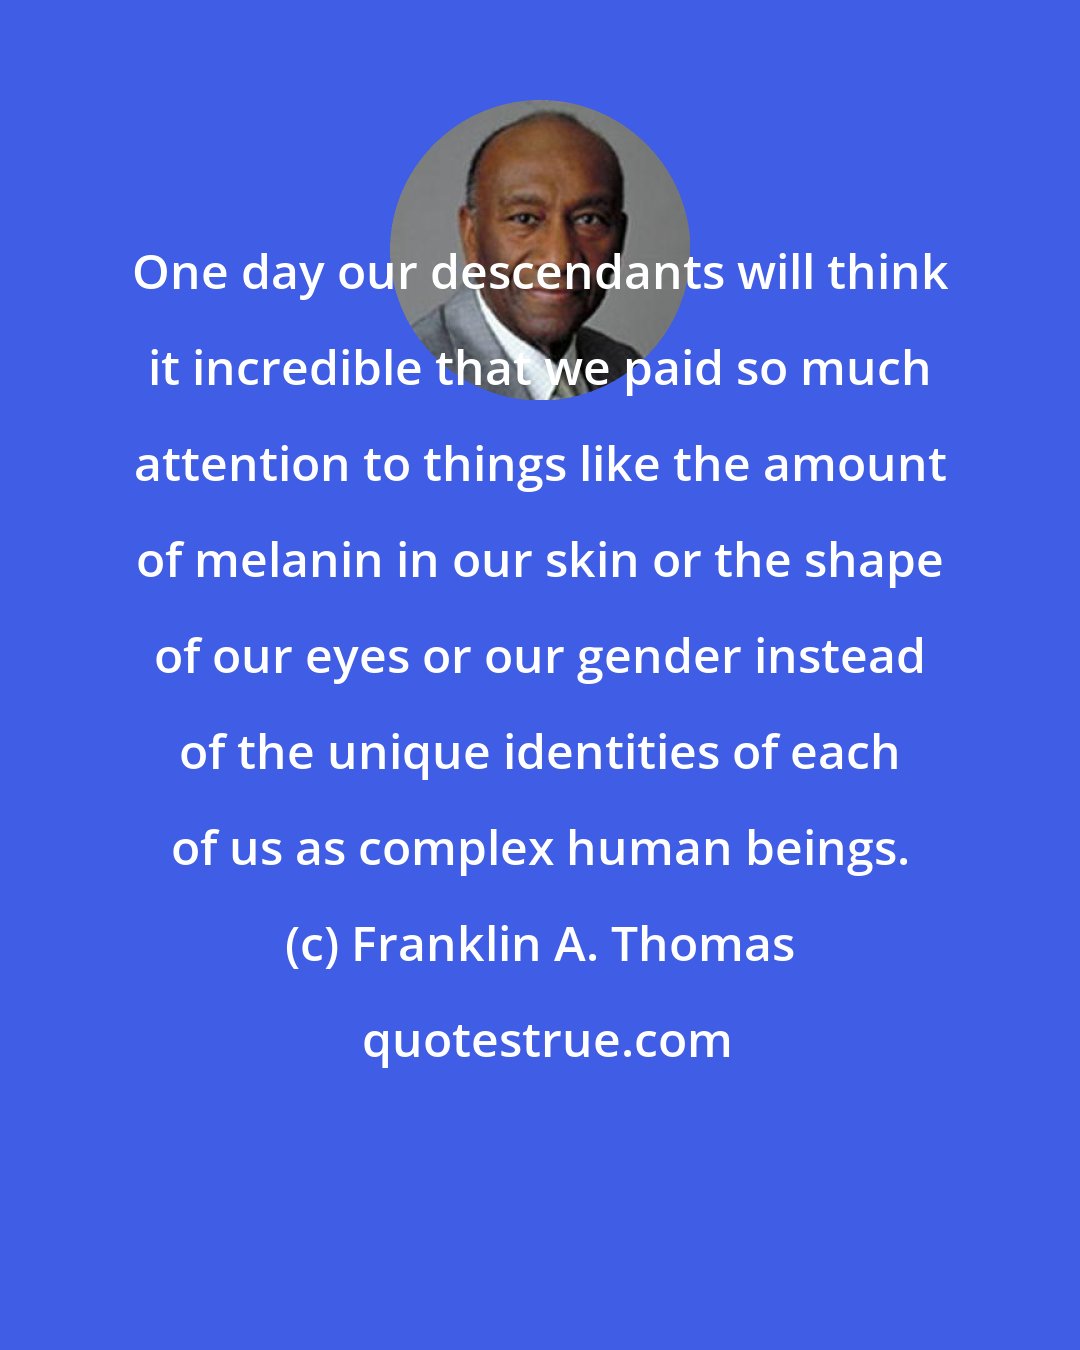 Franklin A. Thomas: One day our descendants will think it incredible that we paid so much attention to things like the amount of melanin in our skin or the shape of our eyes or our gender instead of the unique identities of each of us as complex human beings.